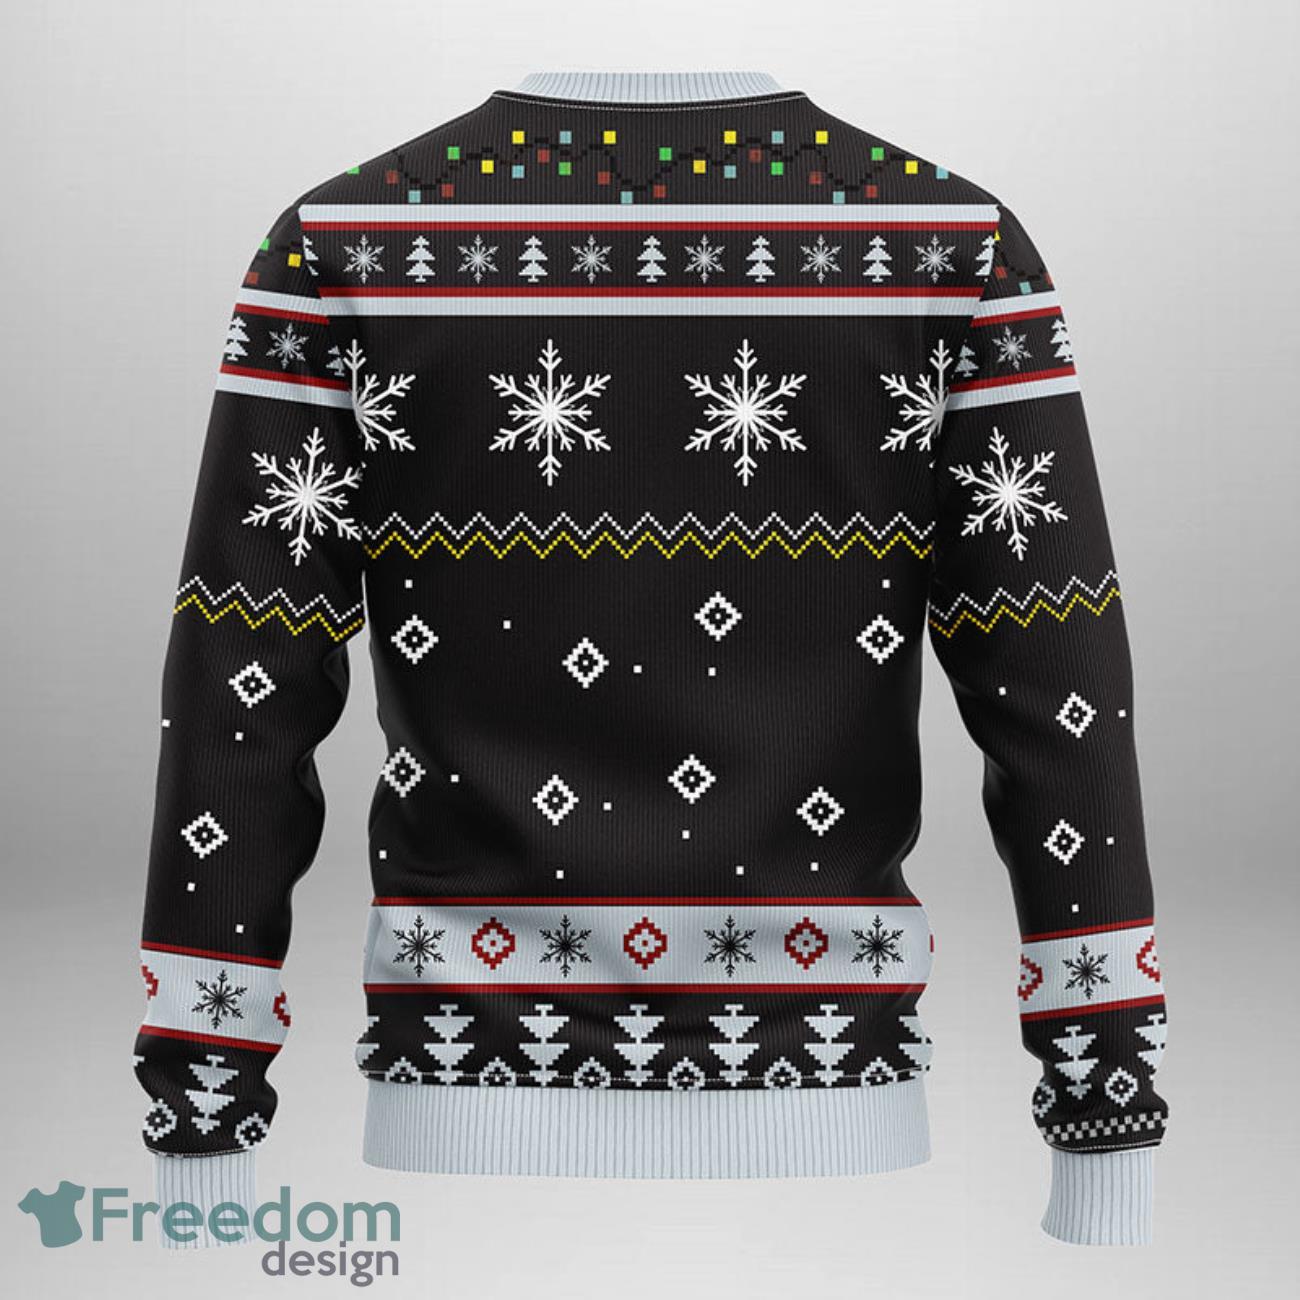 Chicago White Sox Christmas Sweater Cool Sugar Skull White Sox